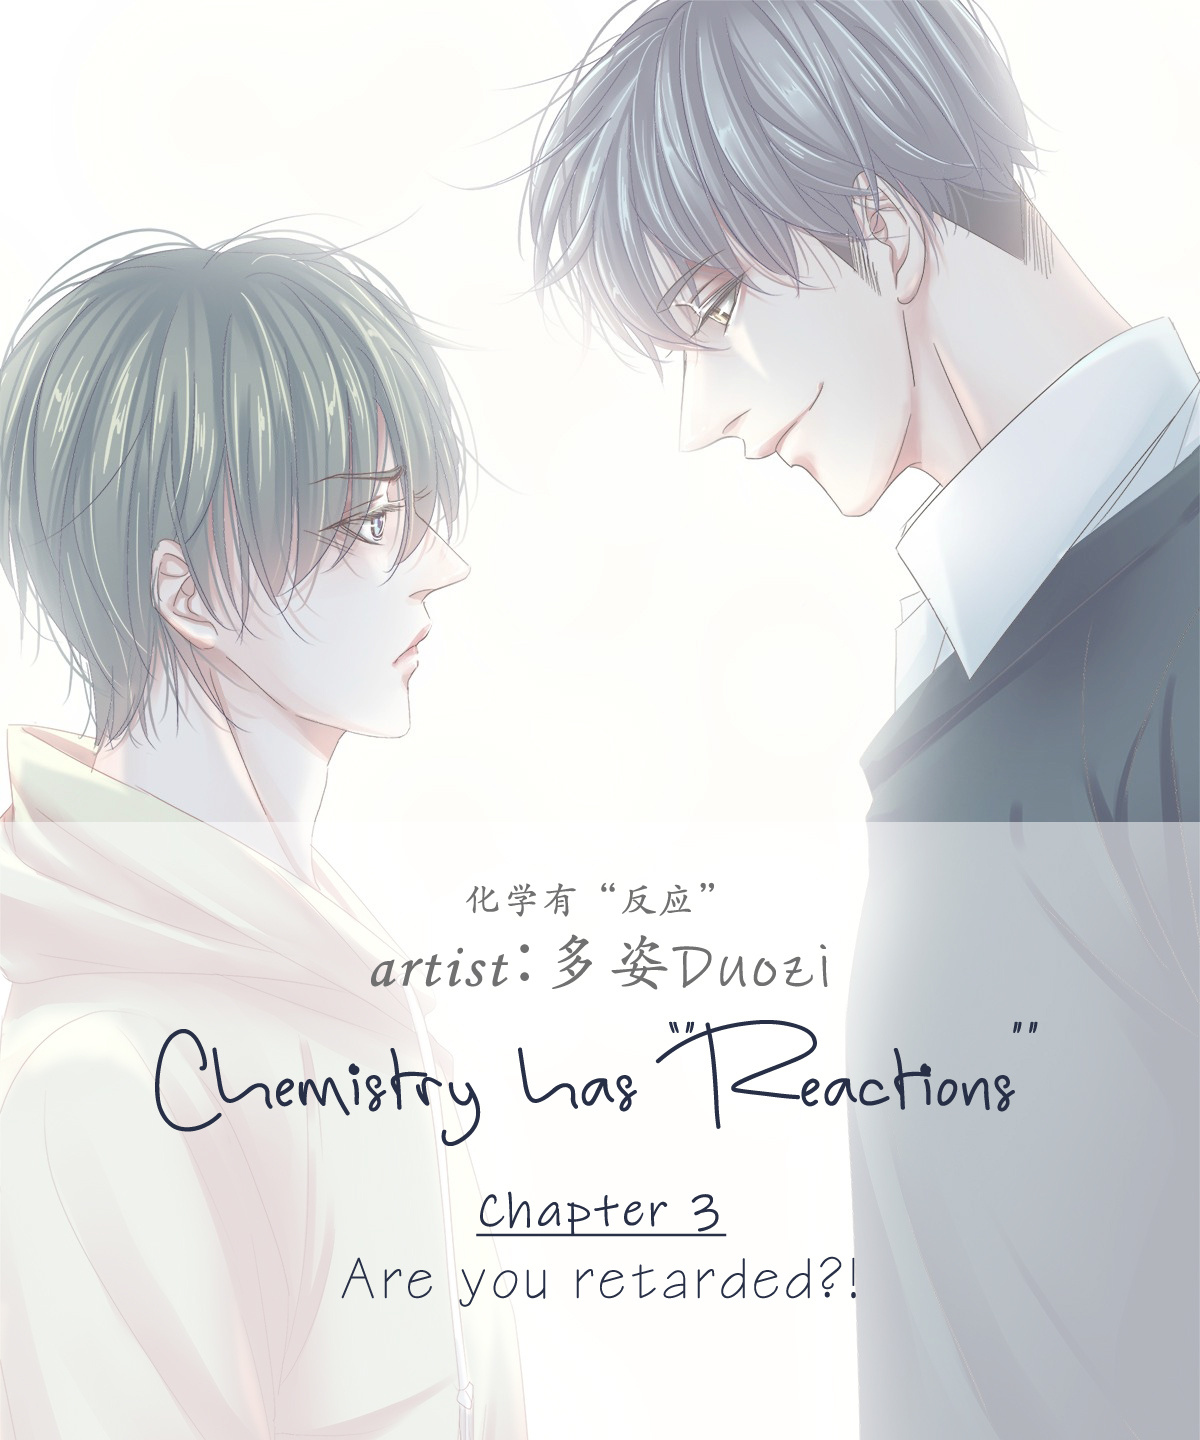 Chemistry Has "reactions" Chapter 3 #1